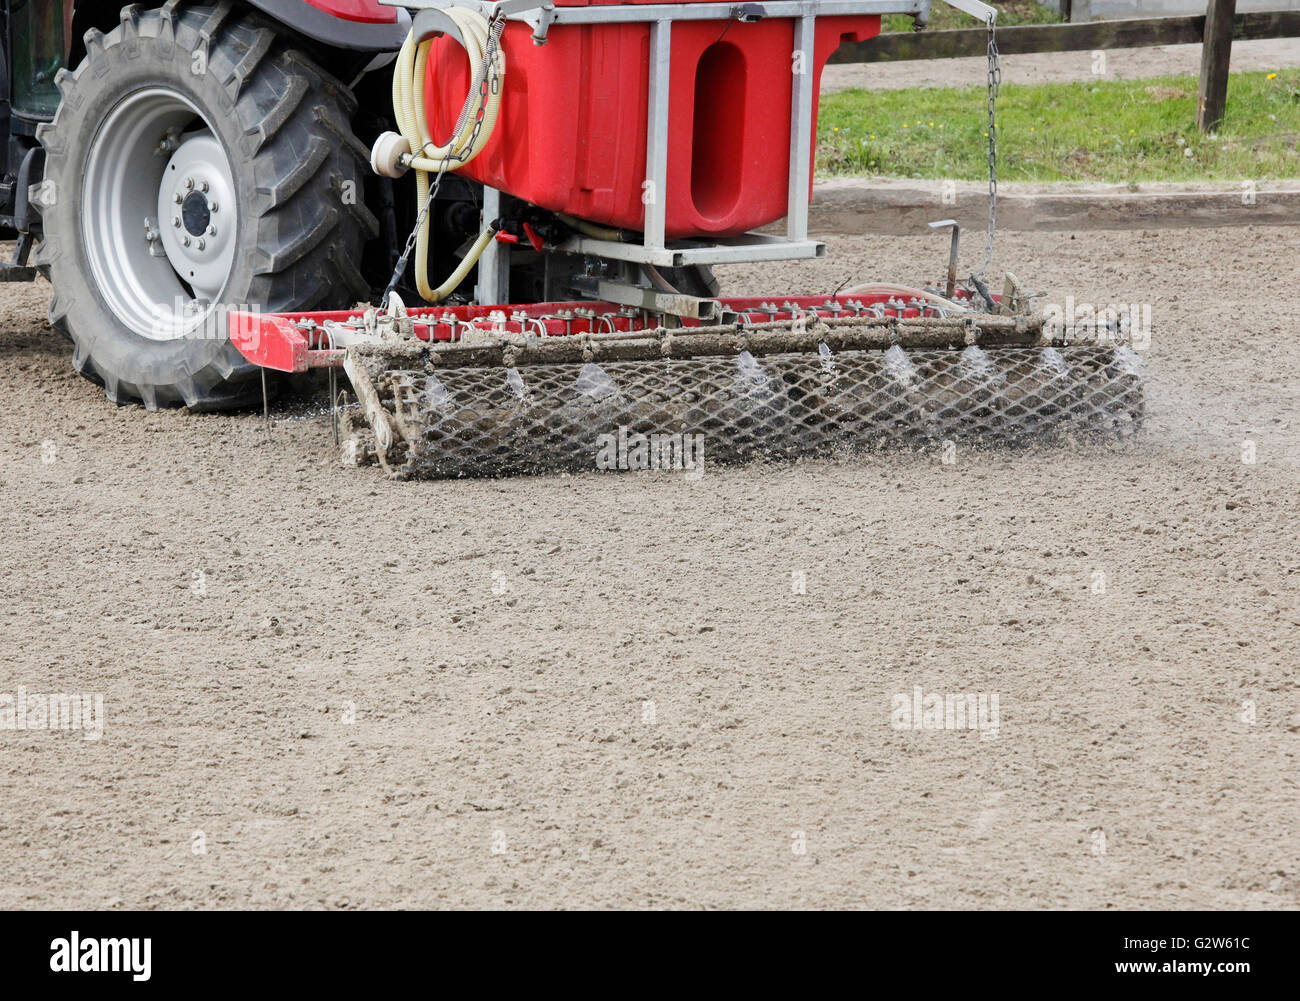 a modern riding arena planner with irrigation behind a tractor Stock Photo